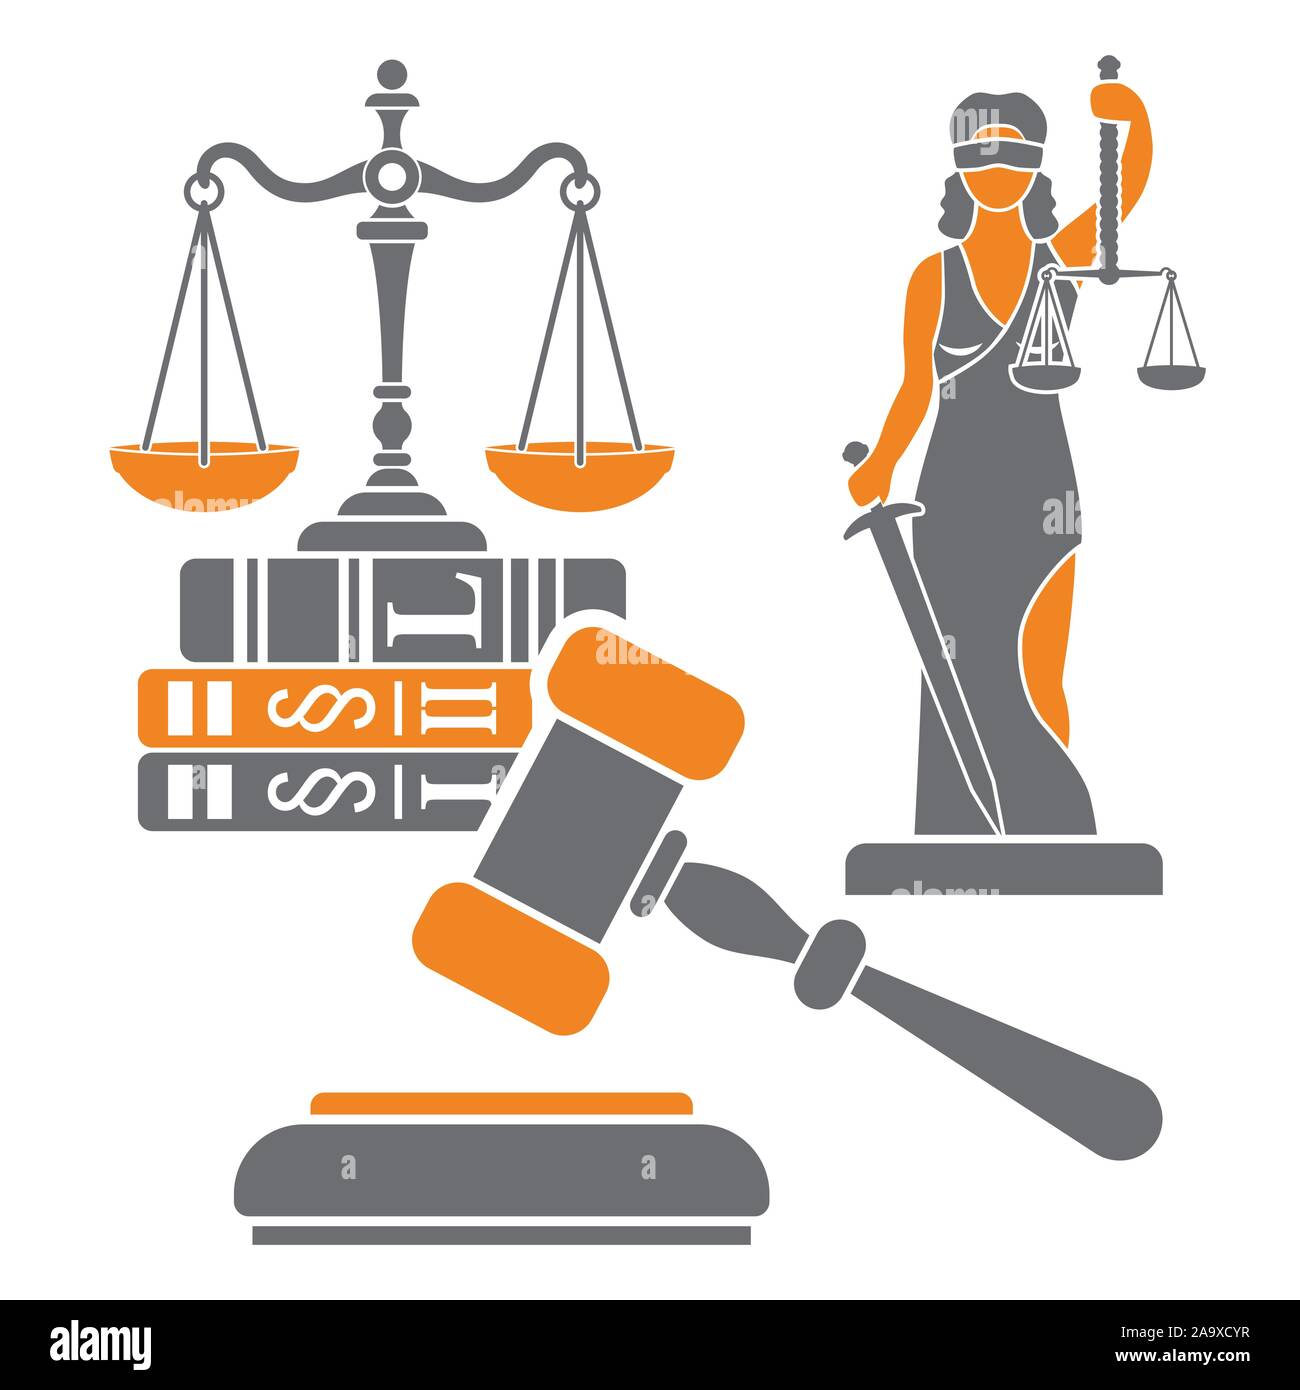 Law and Justice Concept Stock Vector